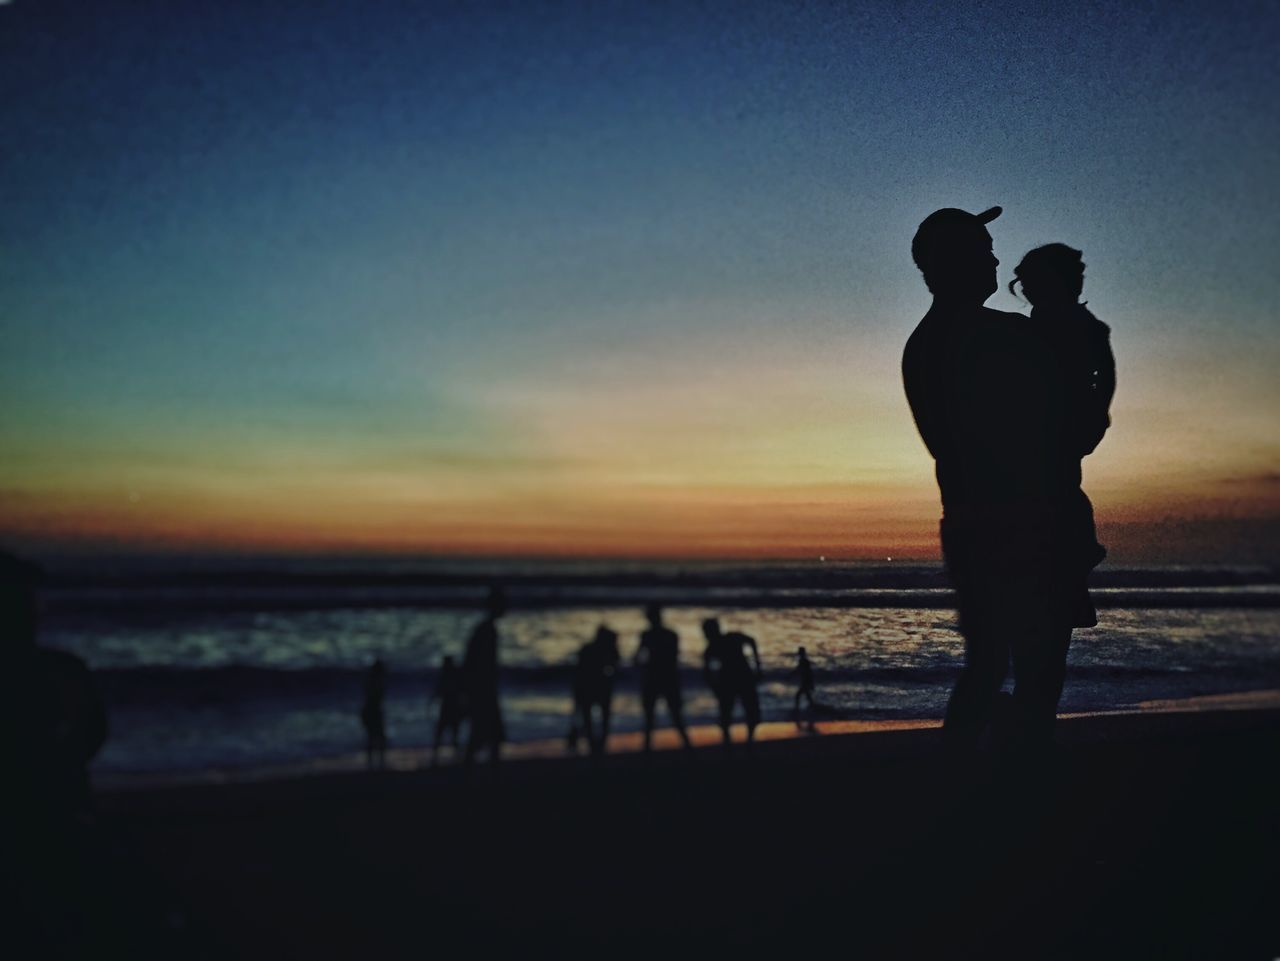 silhouette, sunset, togetherness, sea, leisure activity, men, lifestyles, water, beach, horizon over water, standing, sky, person, bonding, vacations, love, friendship, shore